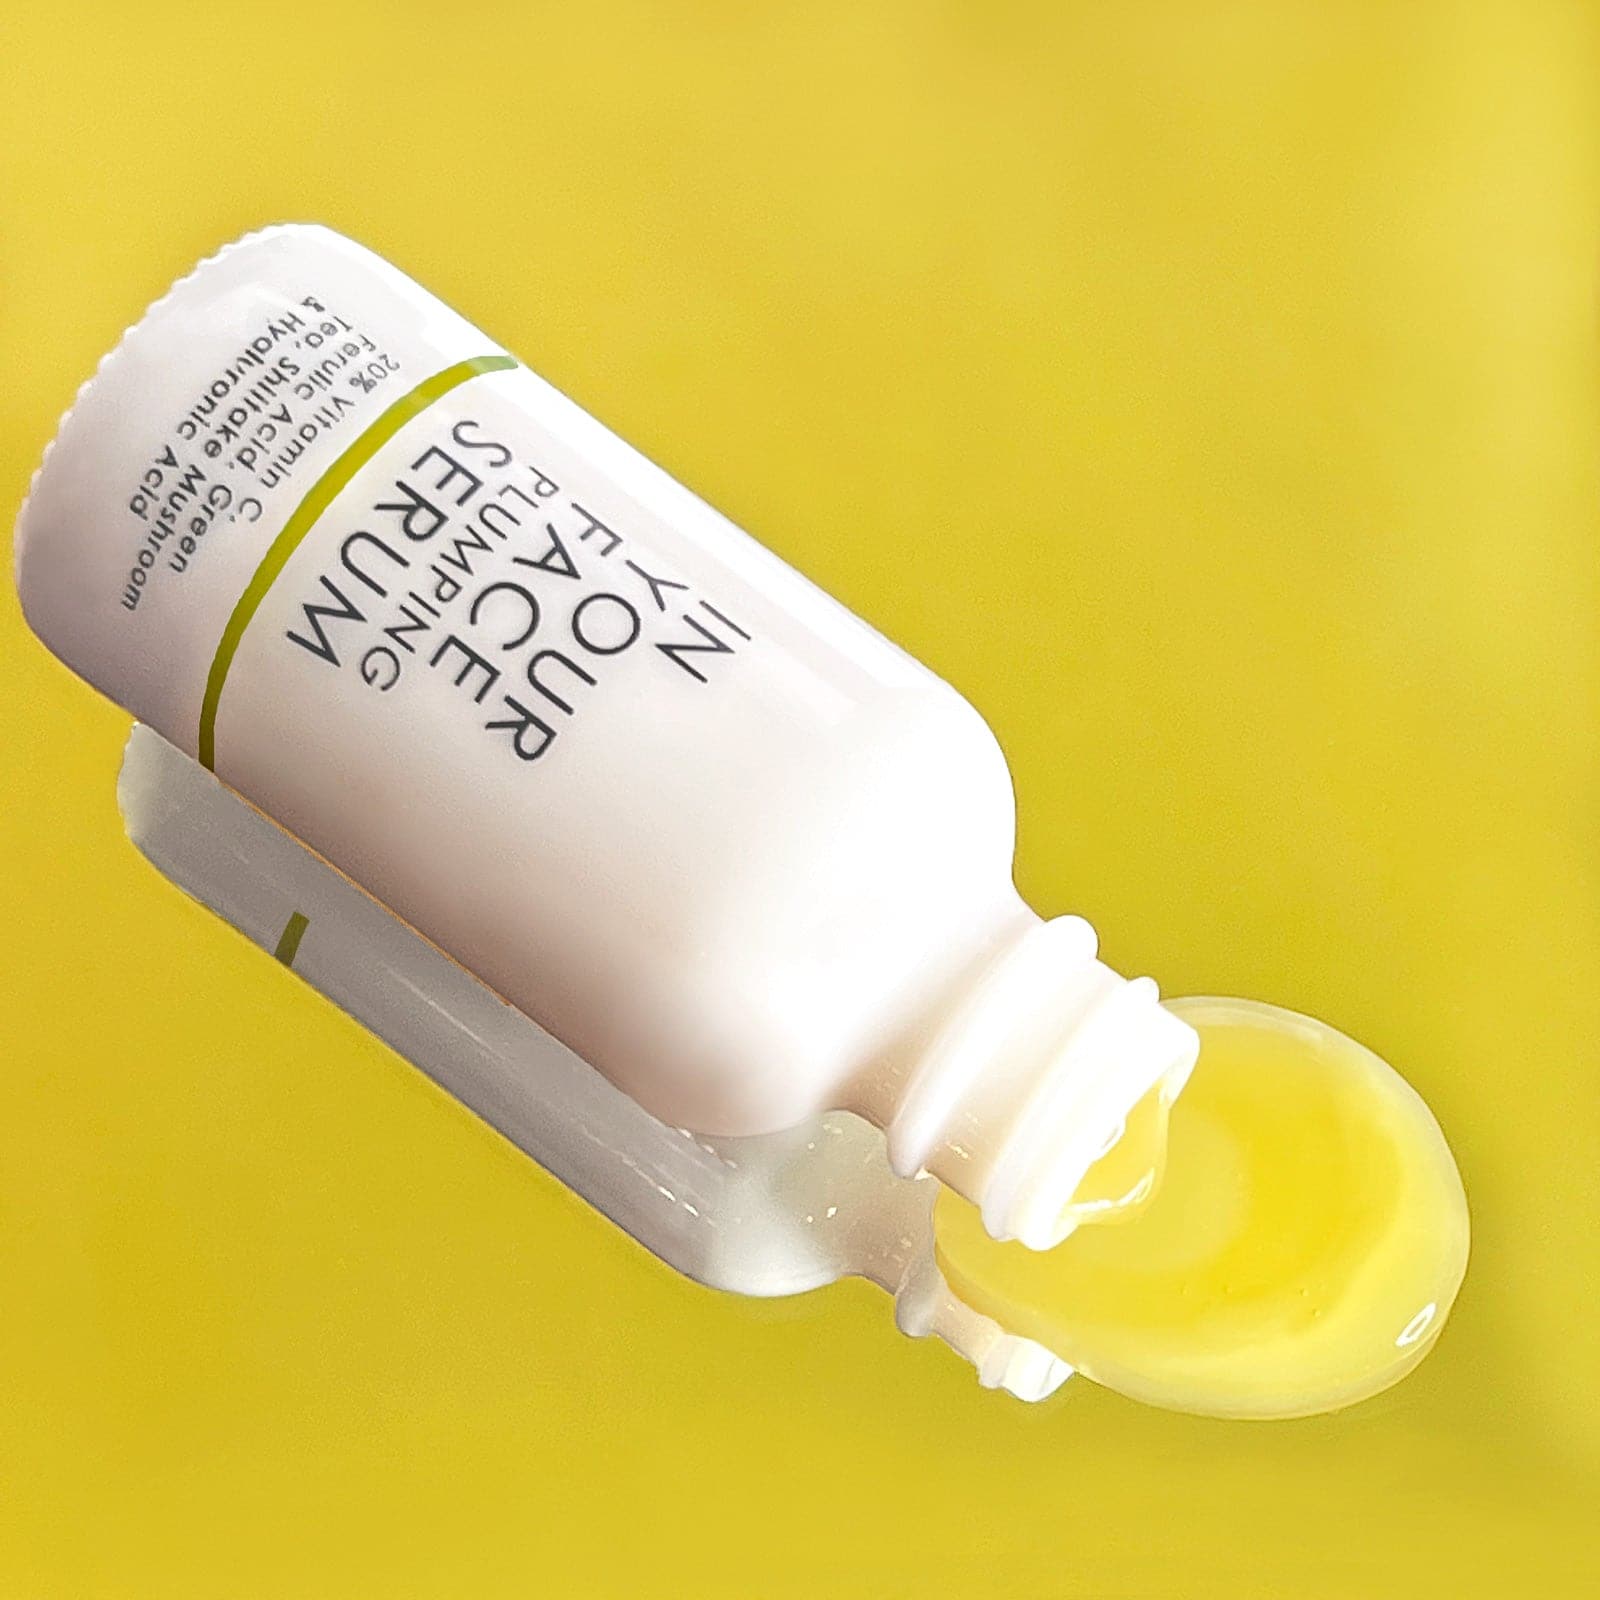 our VITAMIN C PLUMPING SERUM on a bright yellow background. The bottle is tipped over and some of the serum is coming out.